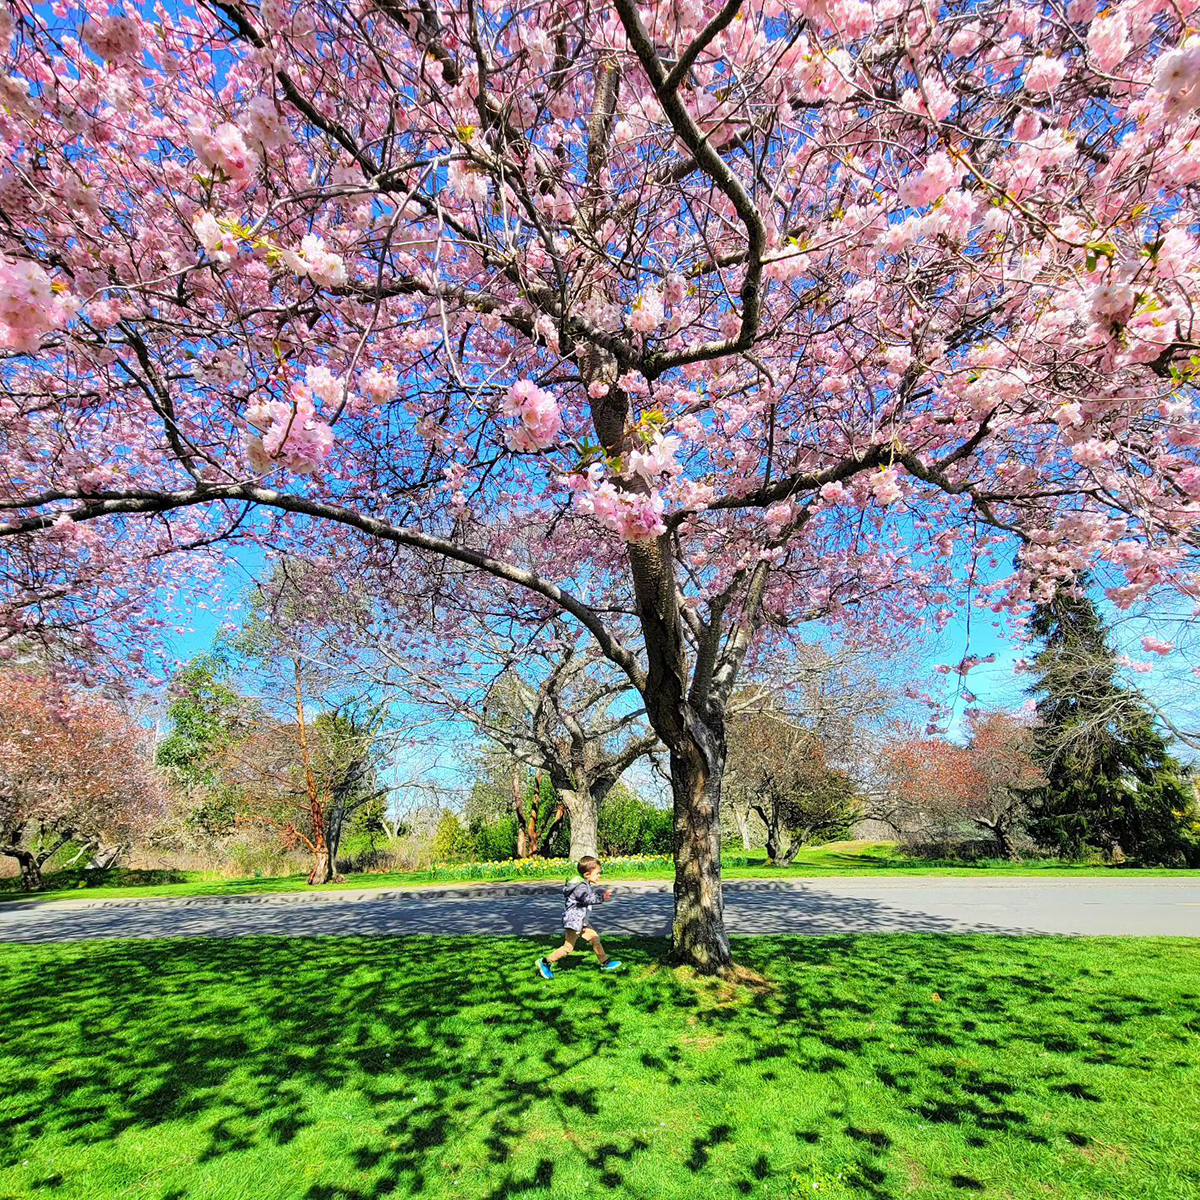 With Canada’s mildest climate, Victoria’s spring season feels endless 🌱🌼

📍: Beacon Hill Park
📸: makik0215 (IG)

#beaconhillpark #spring #flowers #blossoms #bcparks